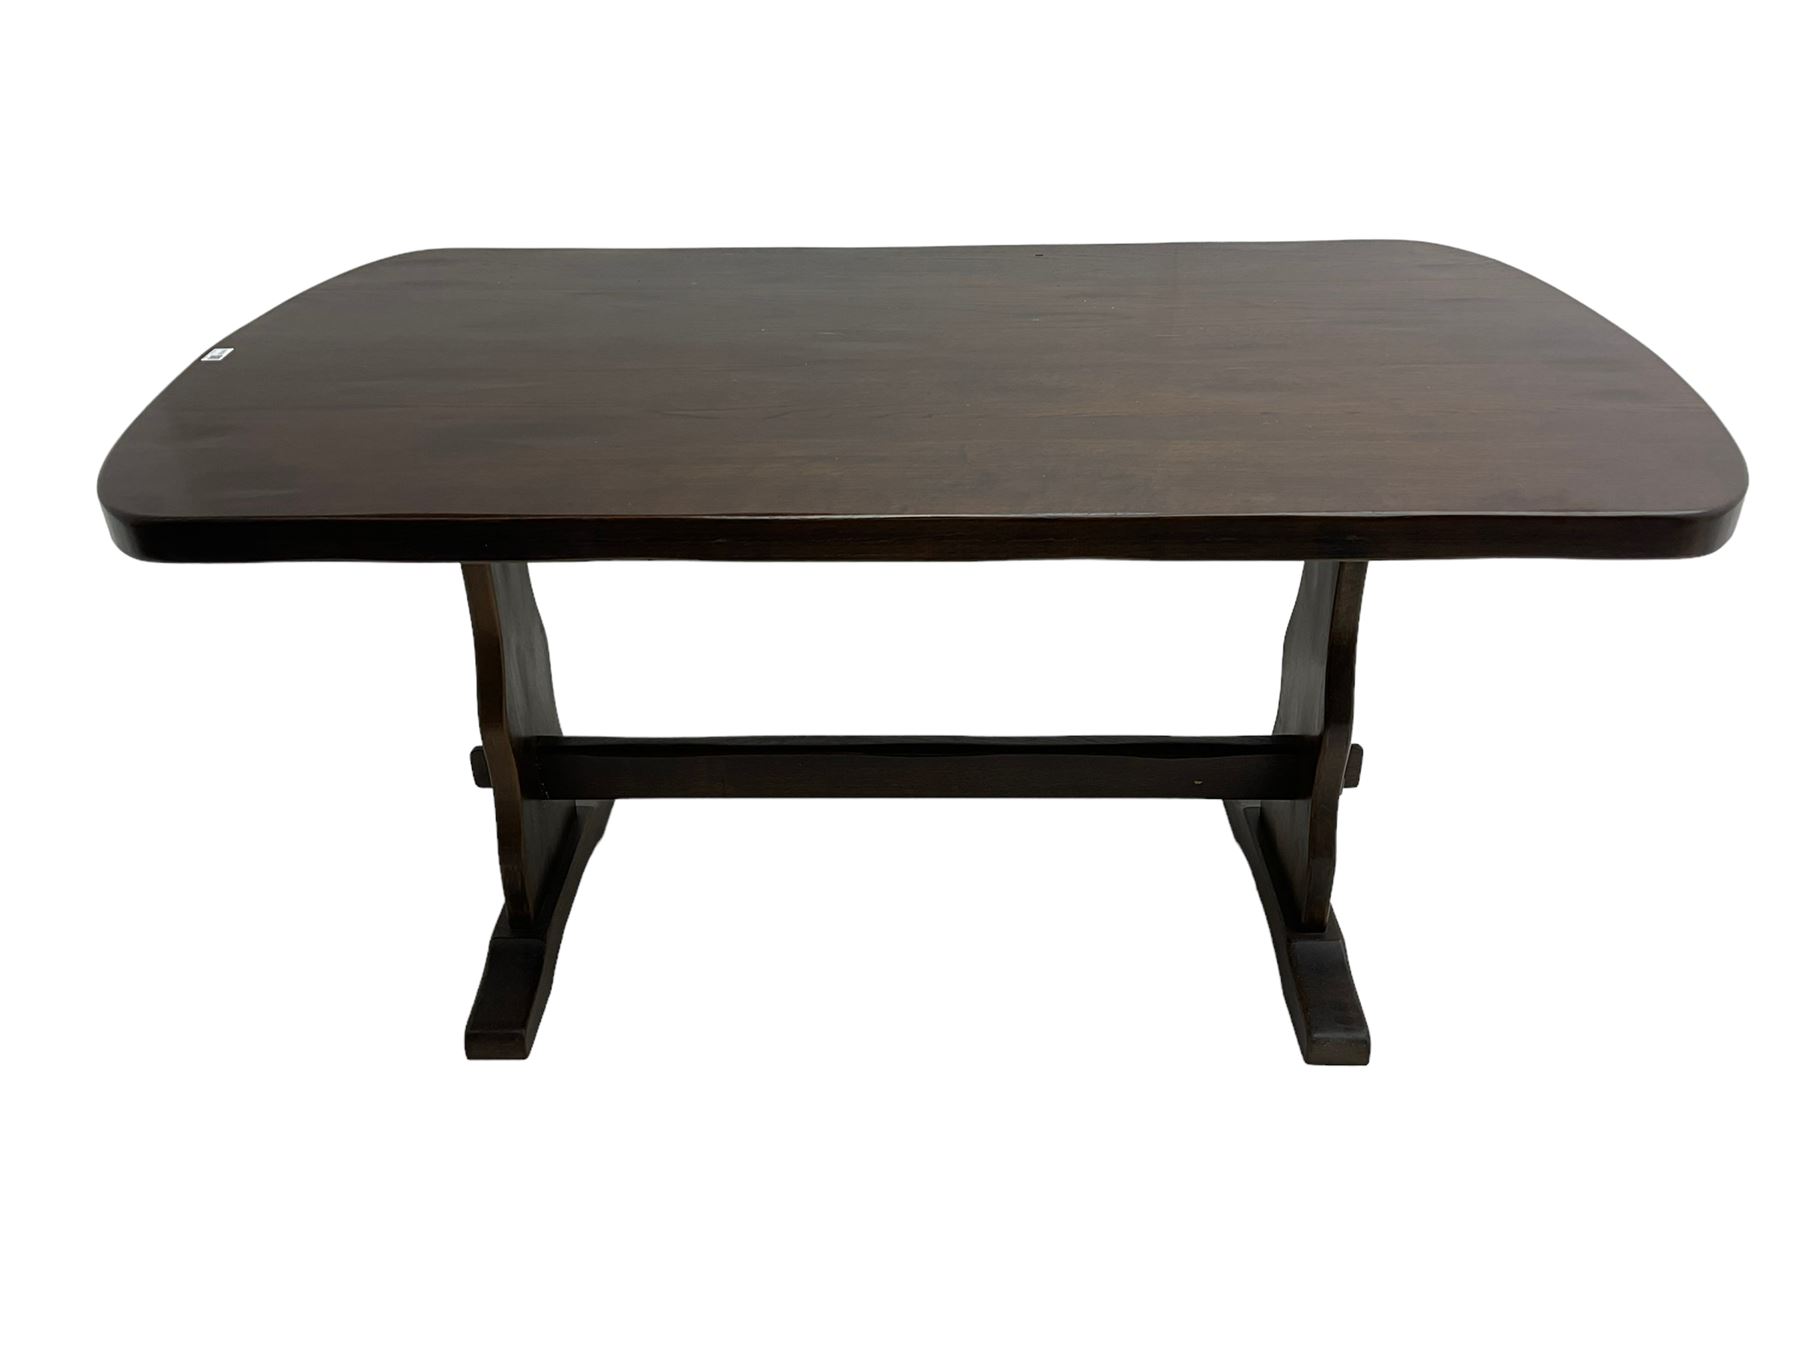 Solid oak dining table - Image 2 of 4